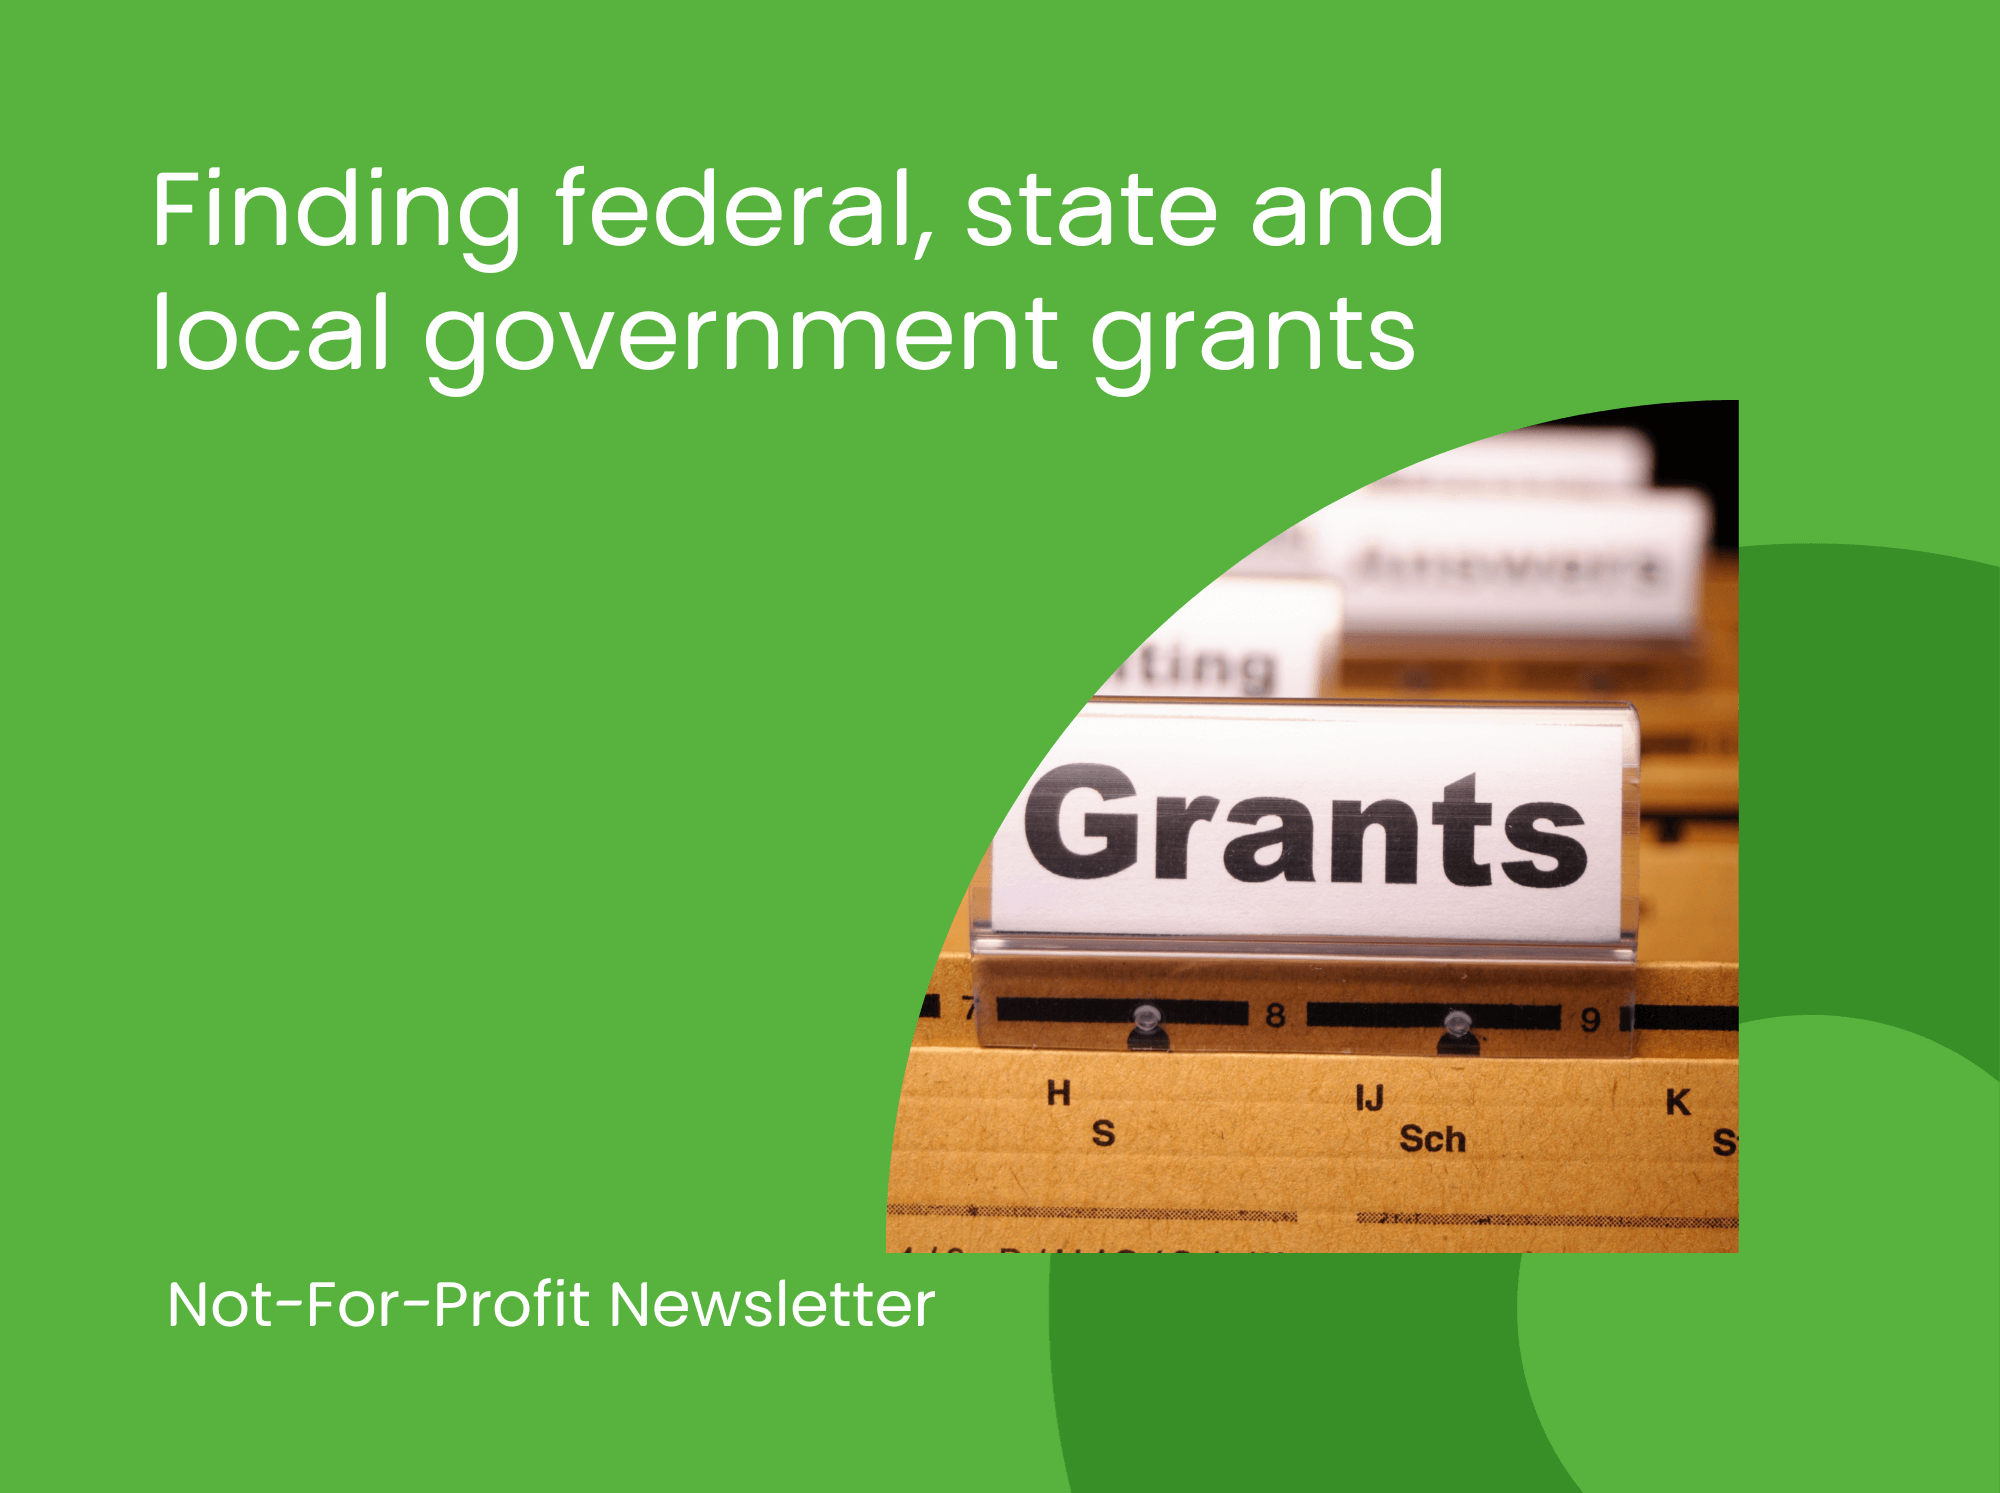 Finding Federal, State and Local Government Grants